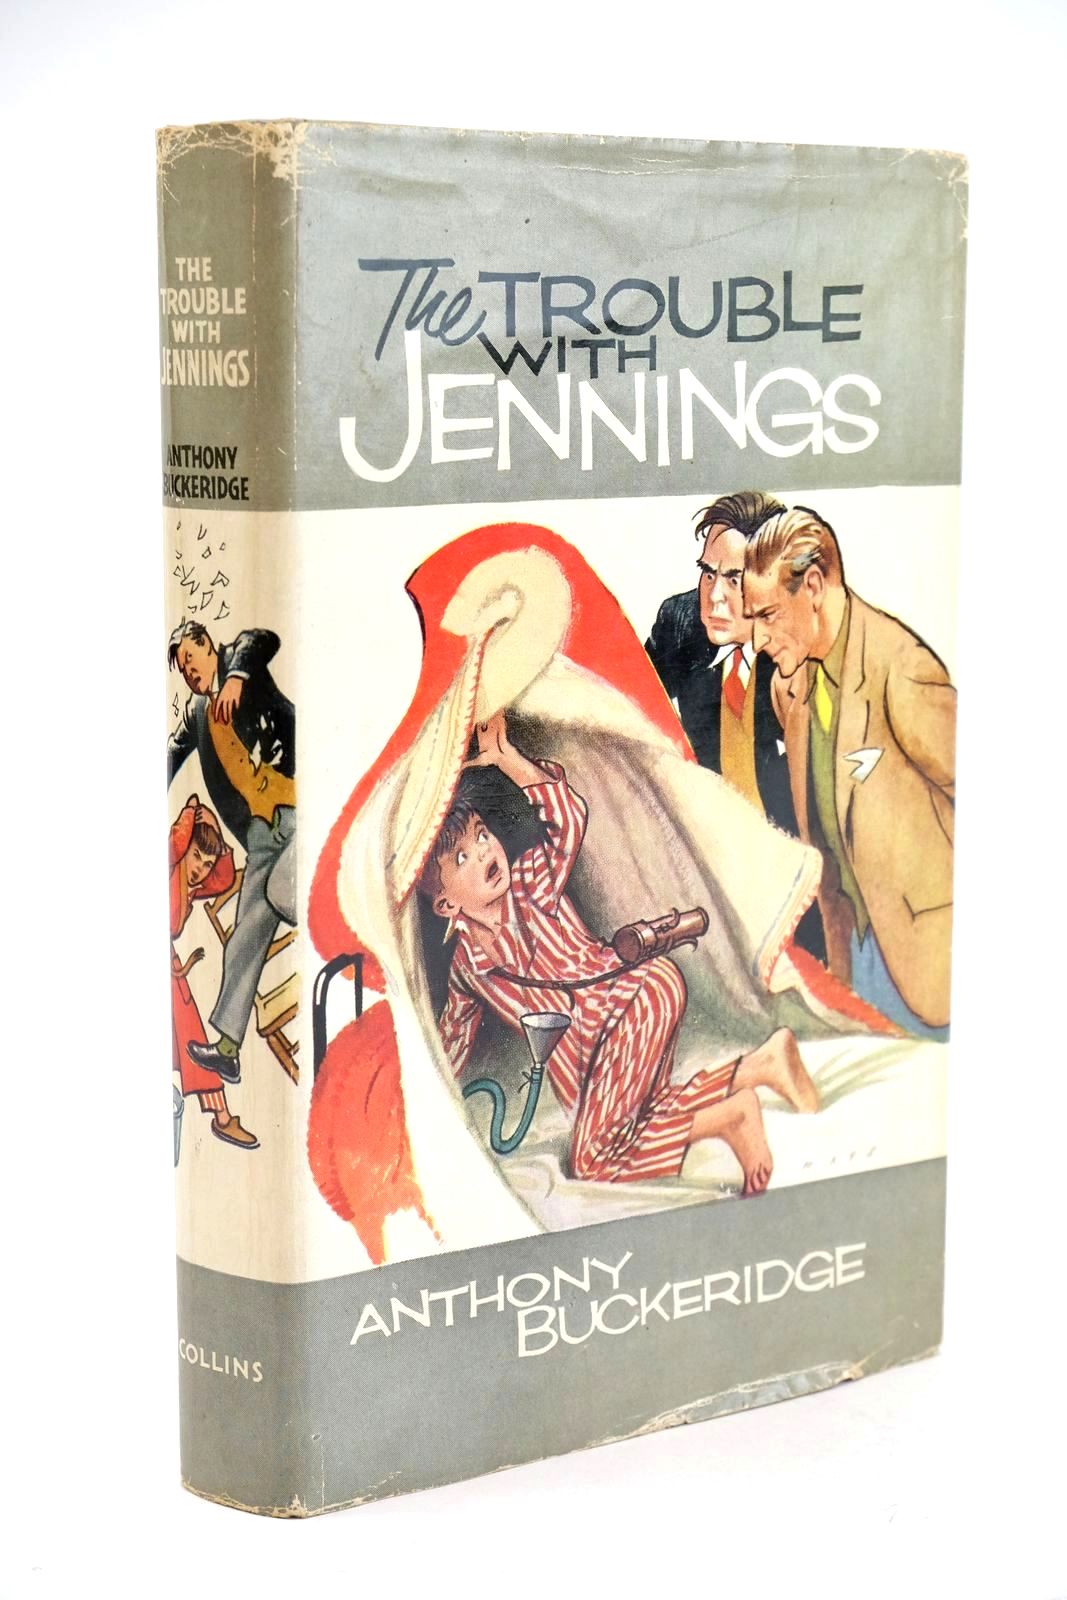 Photo of THE TROUBLE WITH JENNINGS written by Buckeridge, Anthony illustrated by Mays,  published by Collins (STOCK CODE: 1324534)  for sale by Stella & Rose's Books